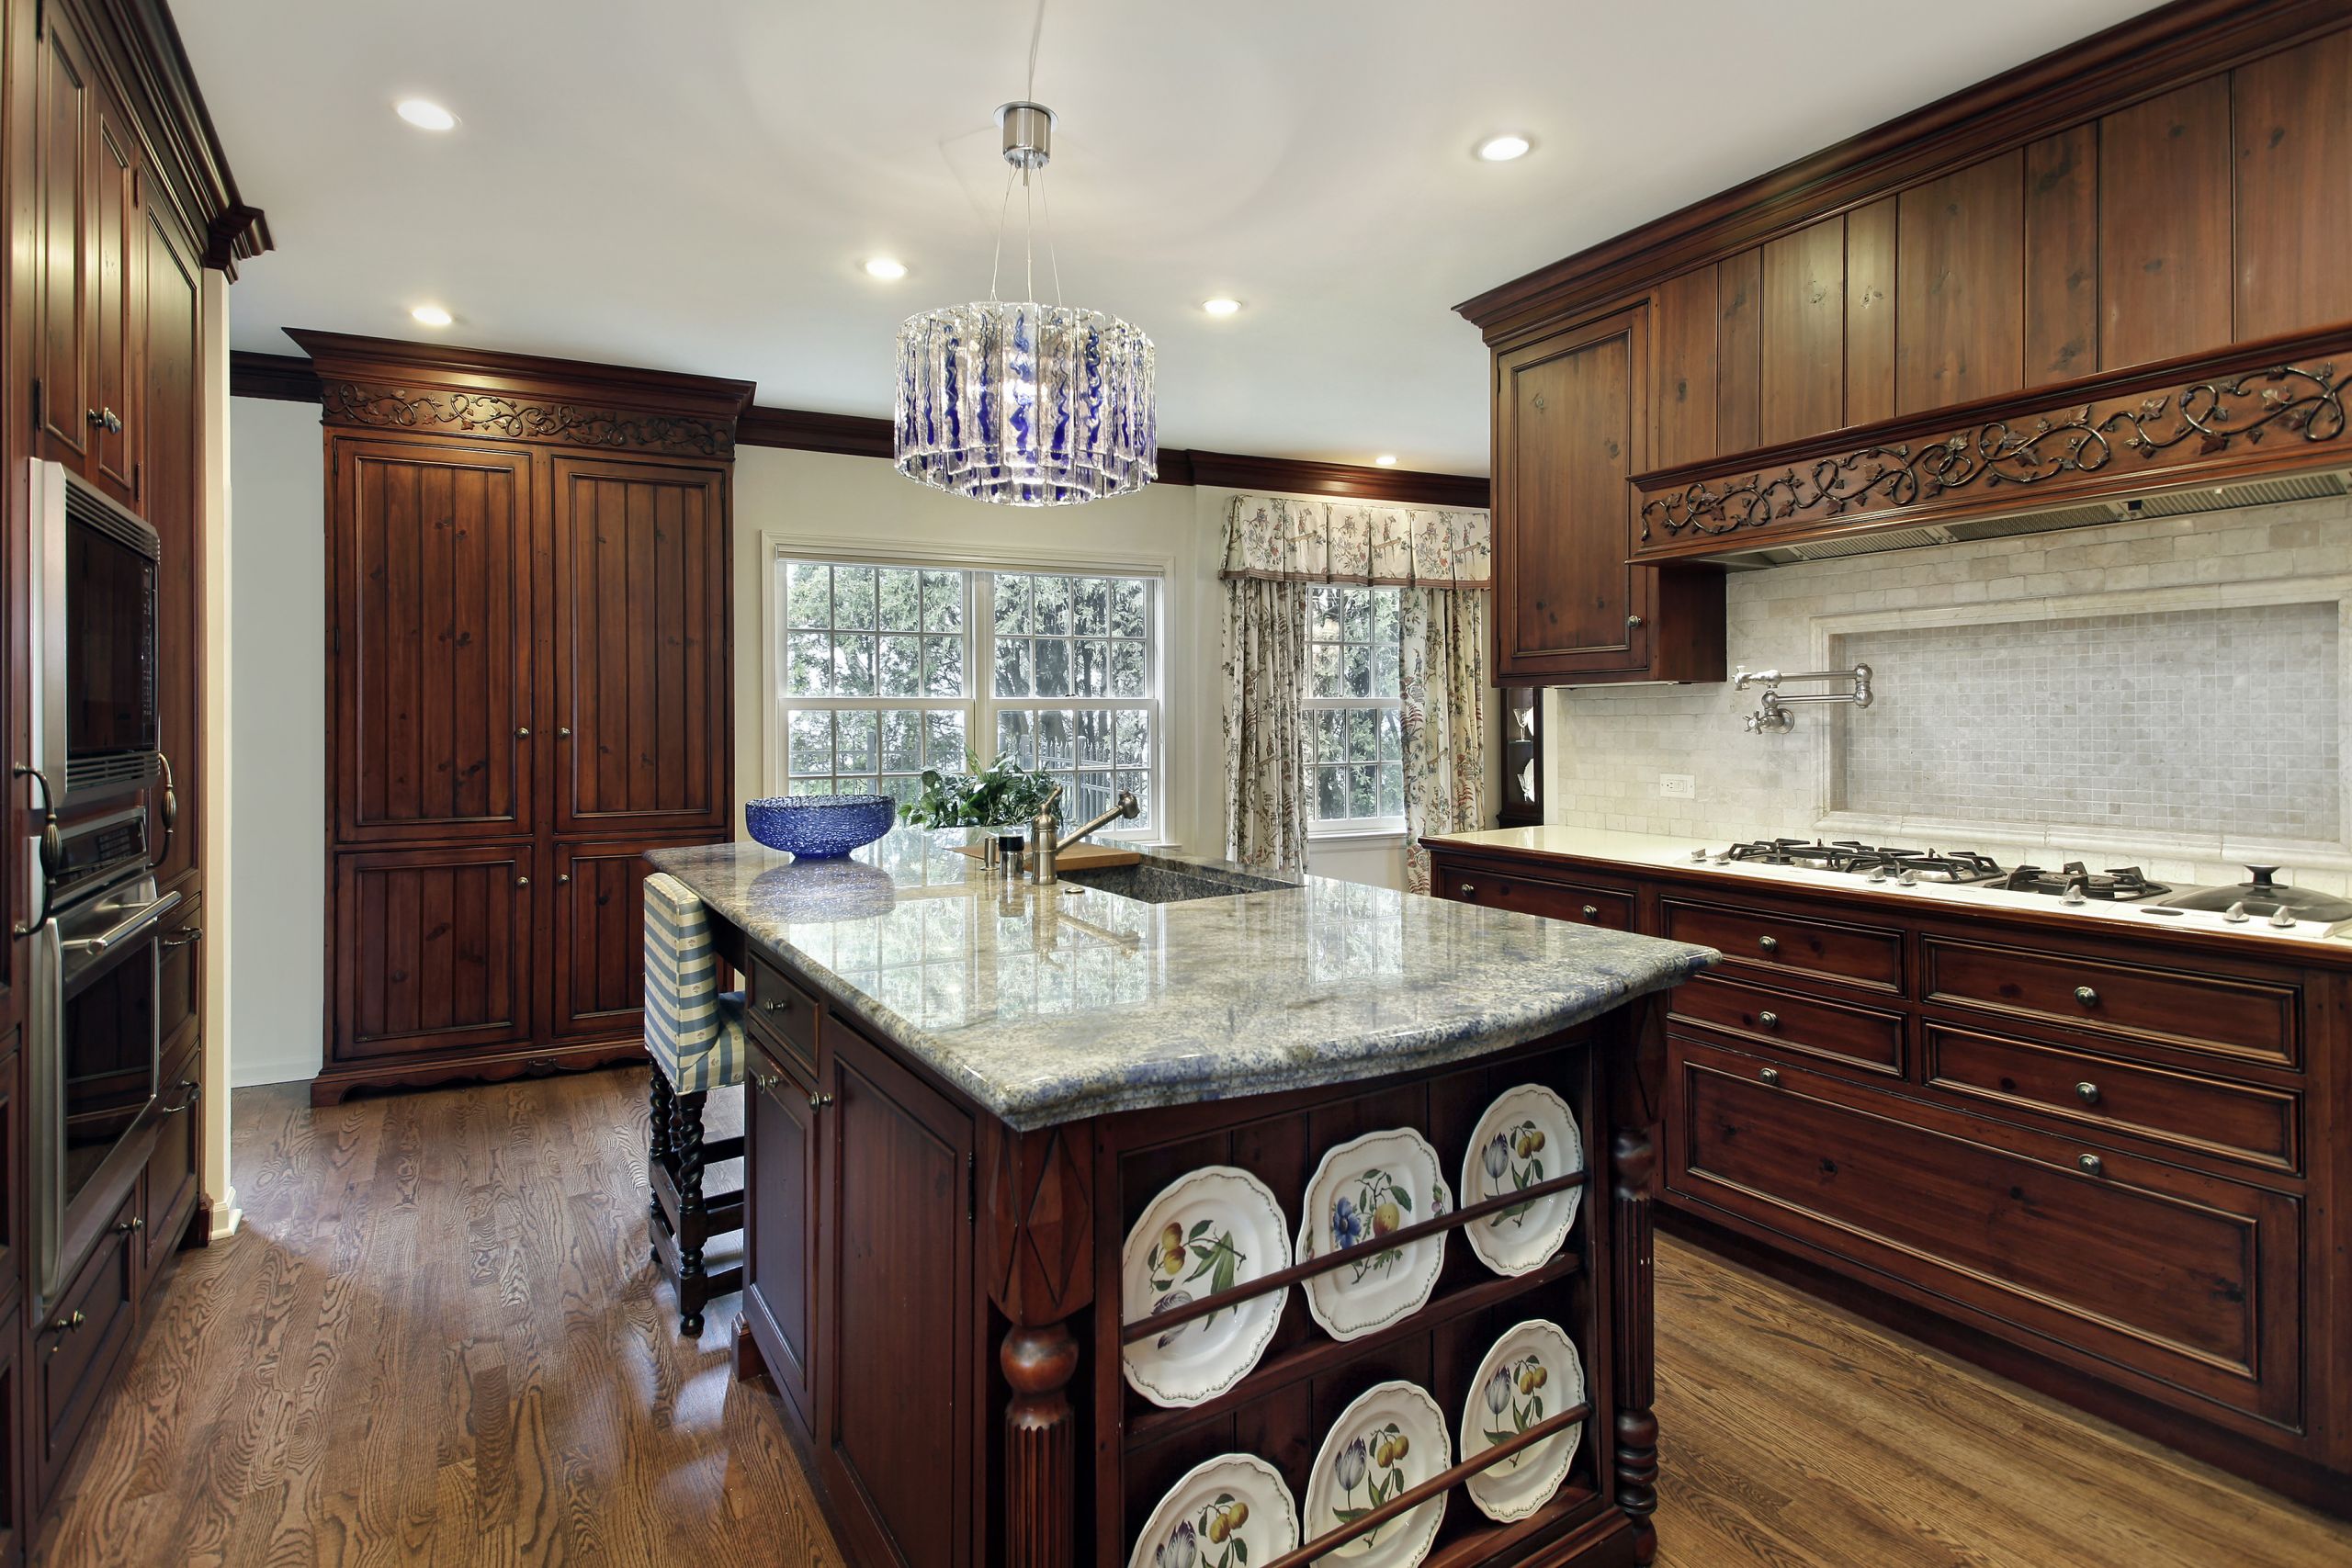 Most Popular Kitchen Cabinets
 Top 6 Most Popular Kitchen Styles Kitchen Cabinets and